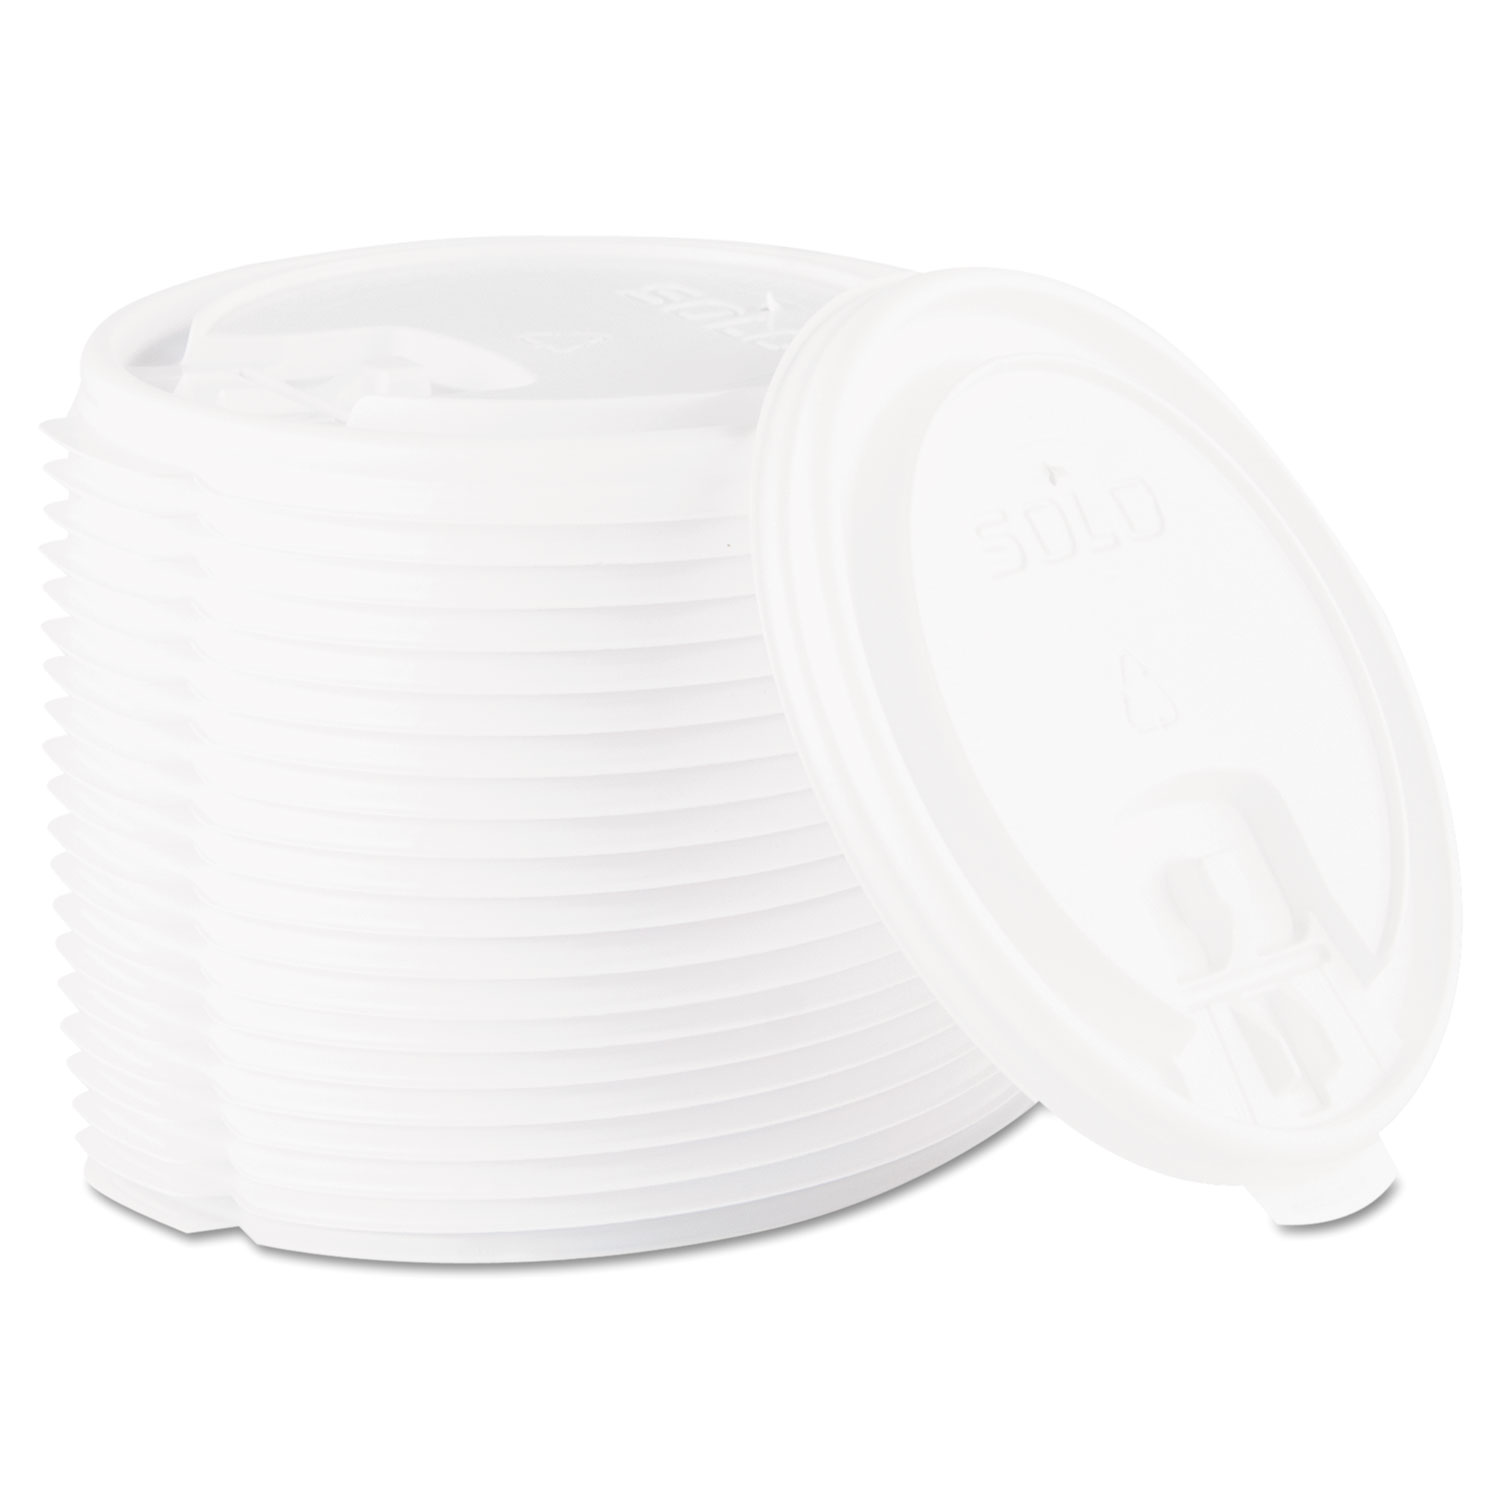 Lift Back and Lock Tab Cup Lids, for 16oz Cups, White, 100/Sleeve, 20 Sleeves/CT